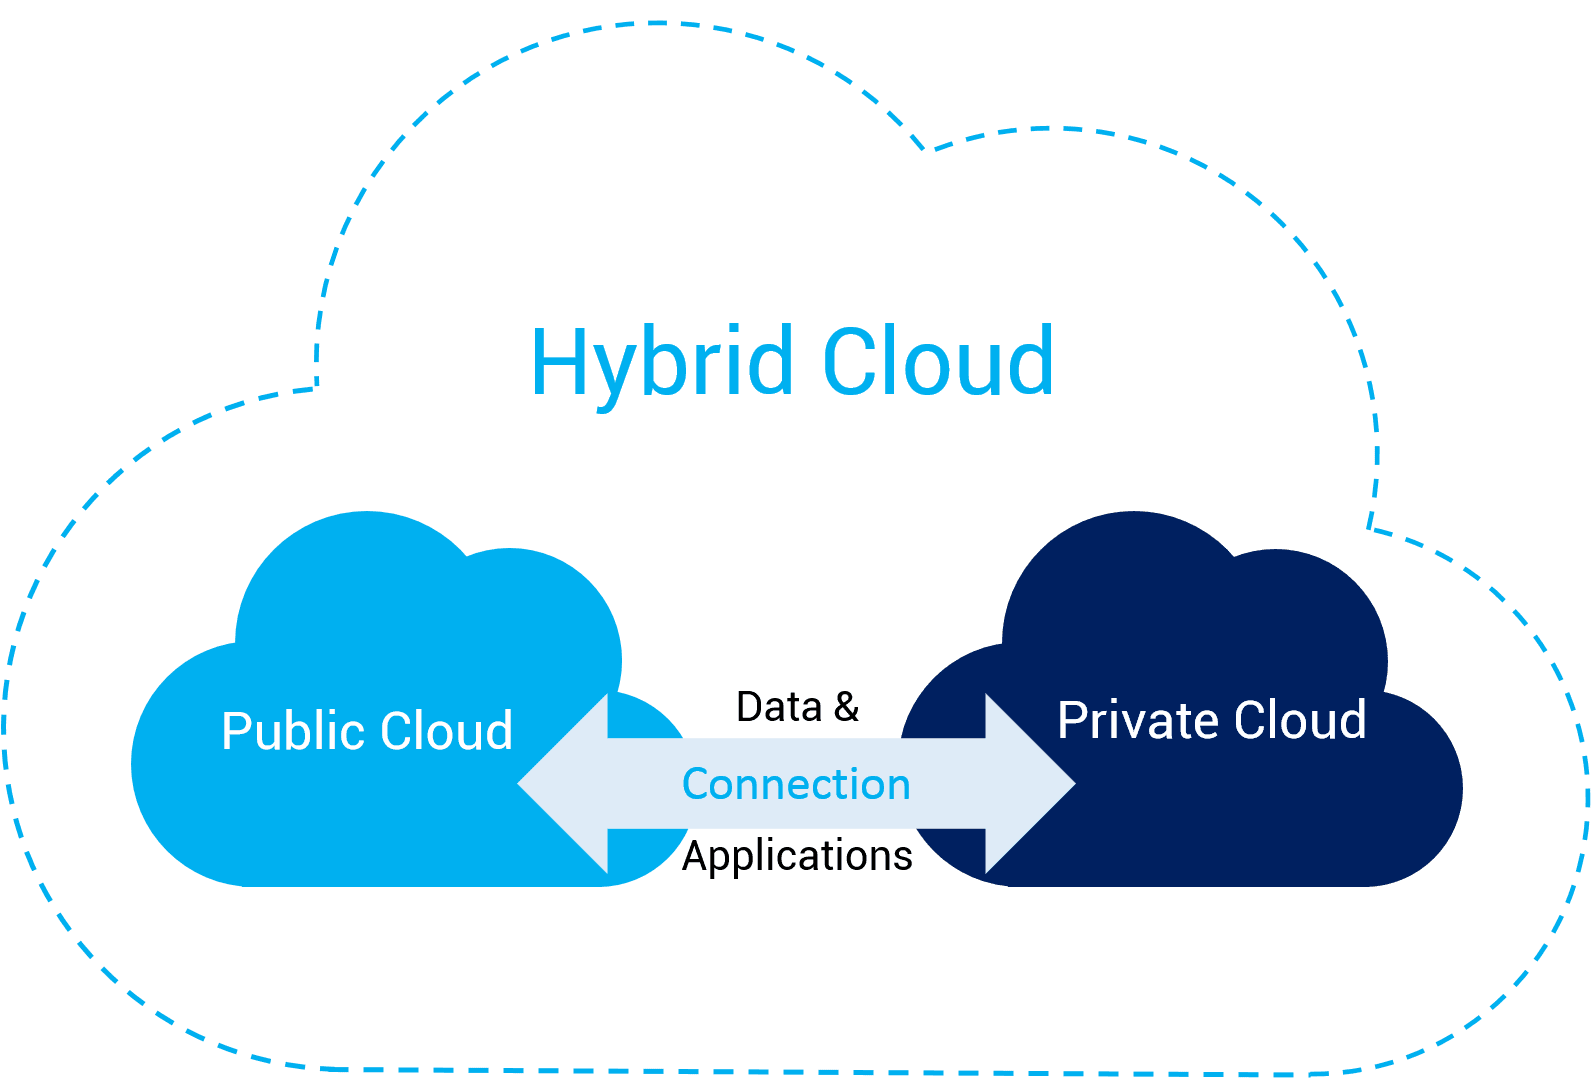 A diagram illustrating the concept of a hybrid cloud, where Public Cloud and Private Cloud are interconnected through Data & Connection, showcasing one of the types of on-demand cloud computing